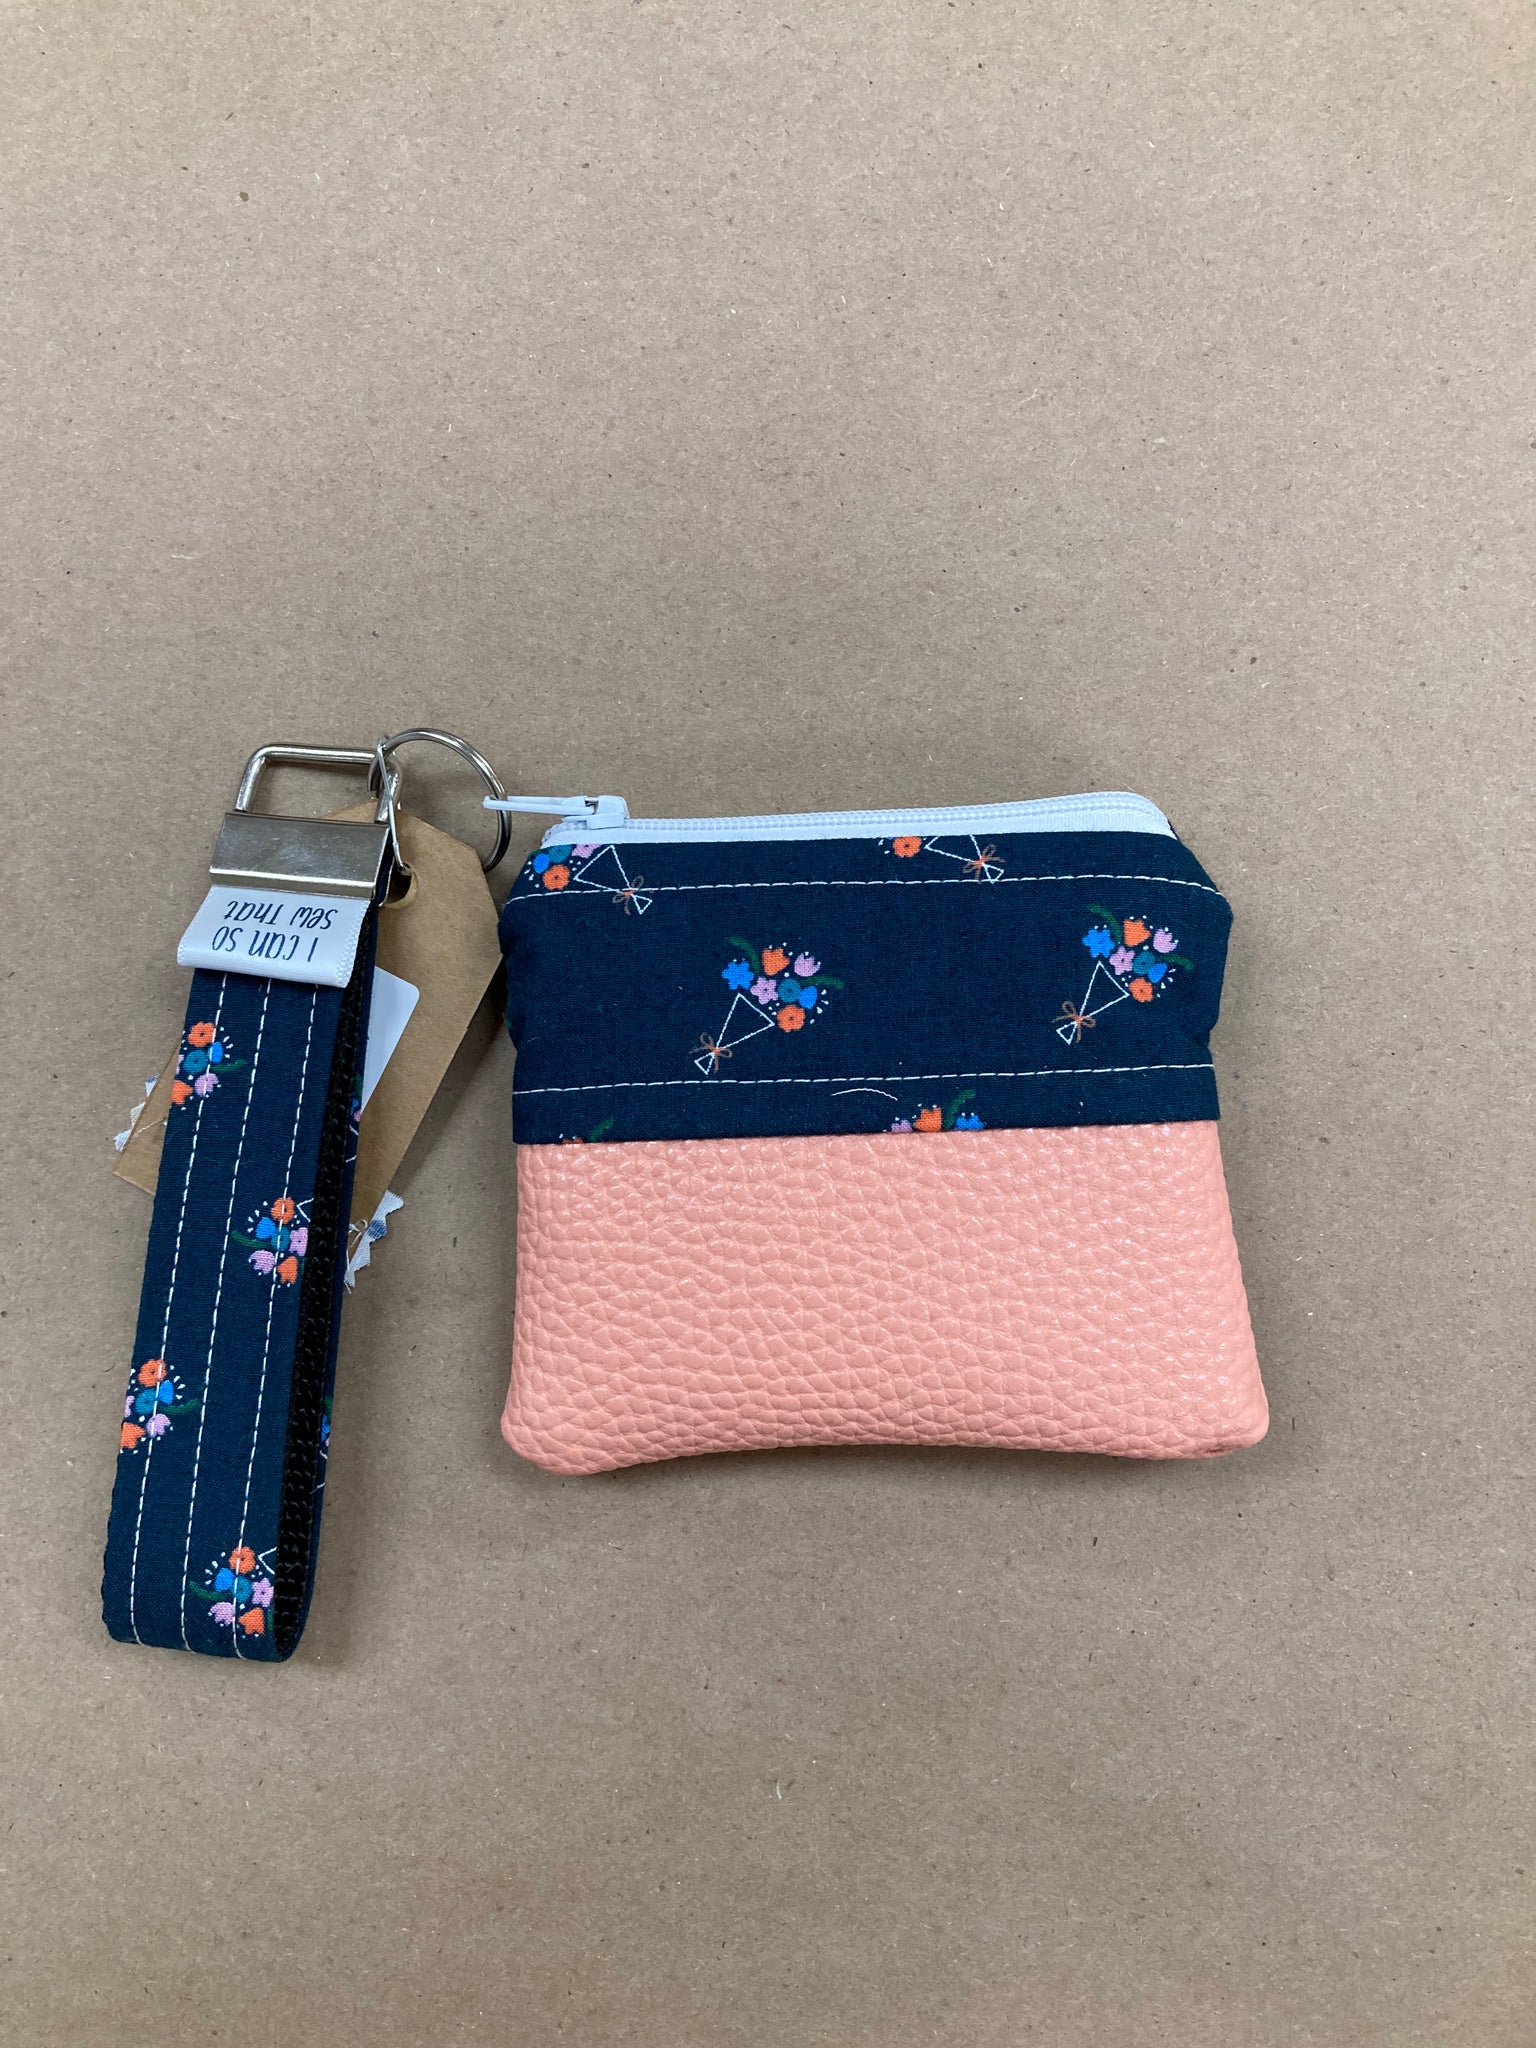 Vegan Leather Zip Pouch 5x5" w/Fob - Coral/Navy